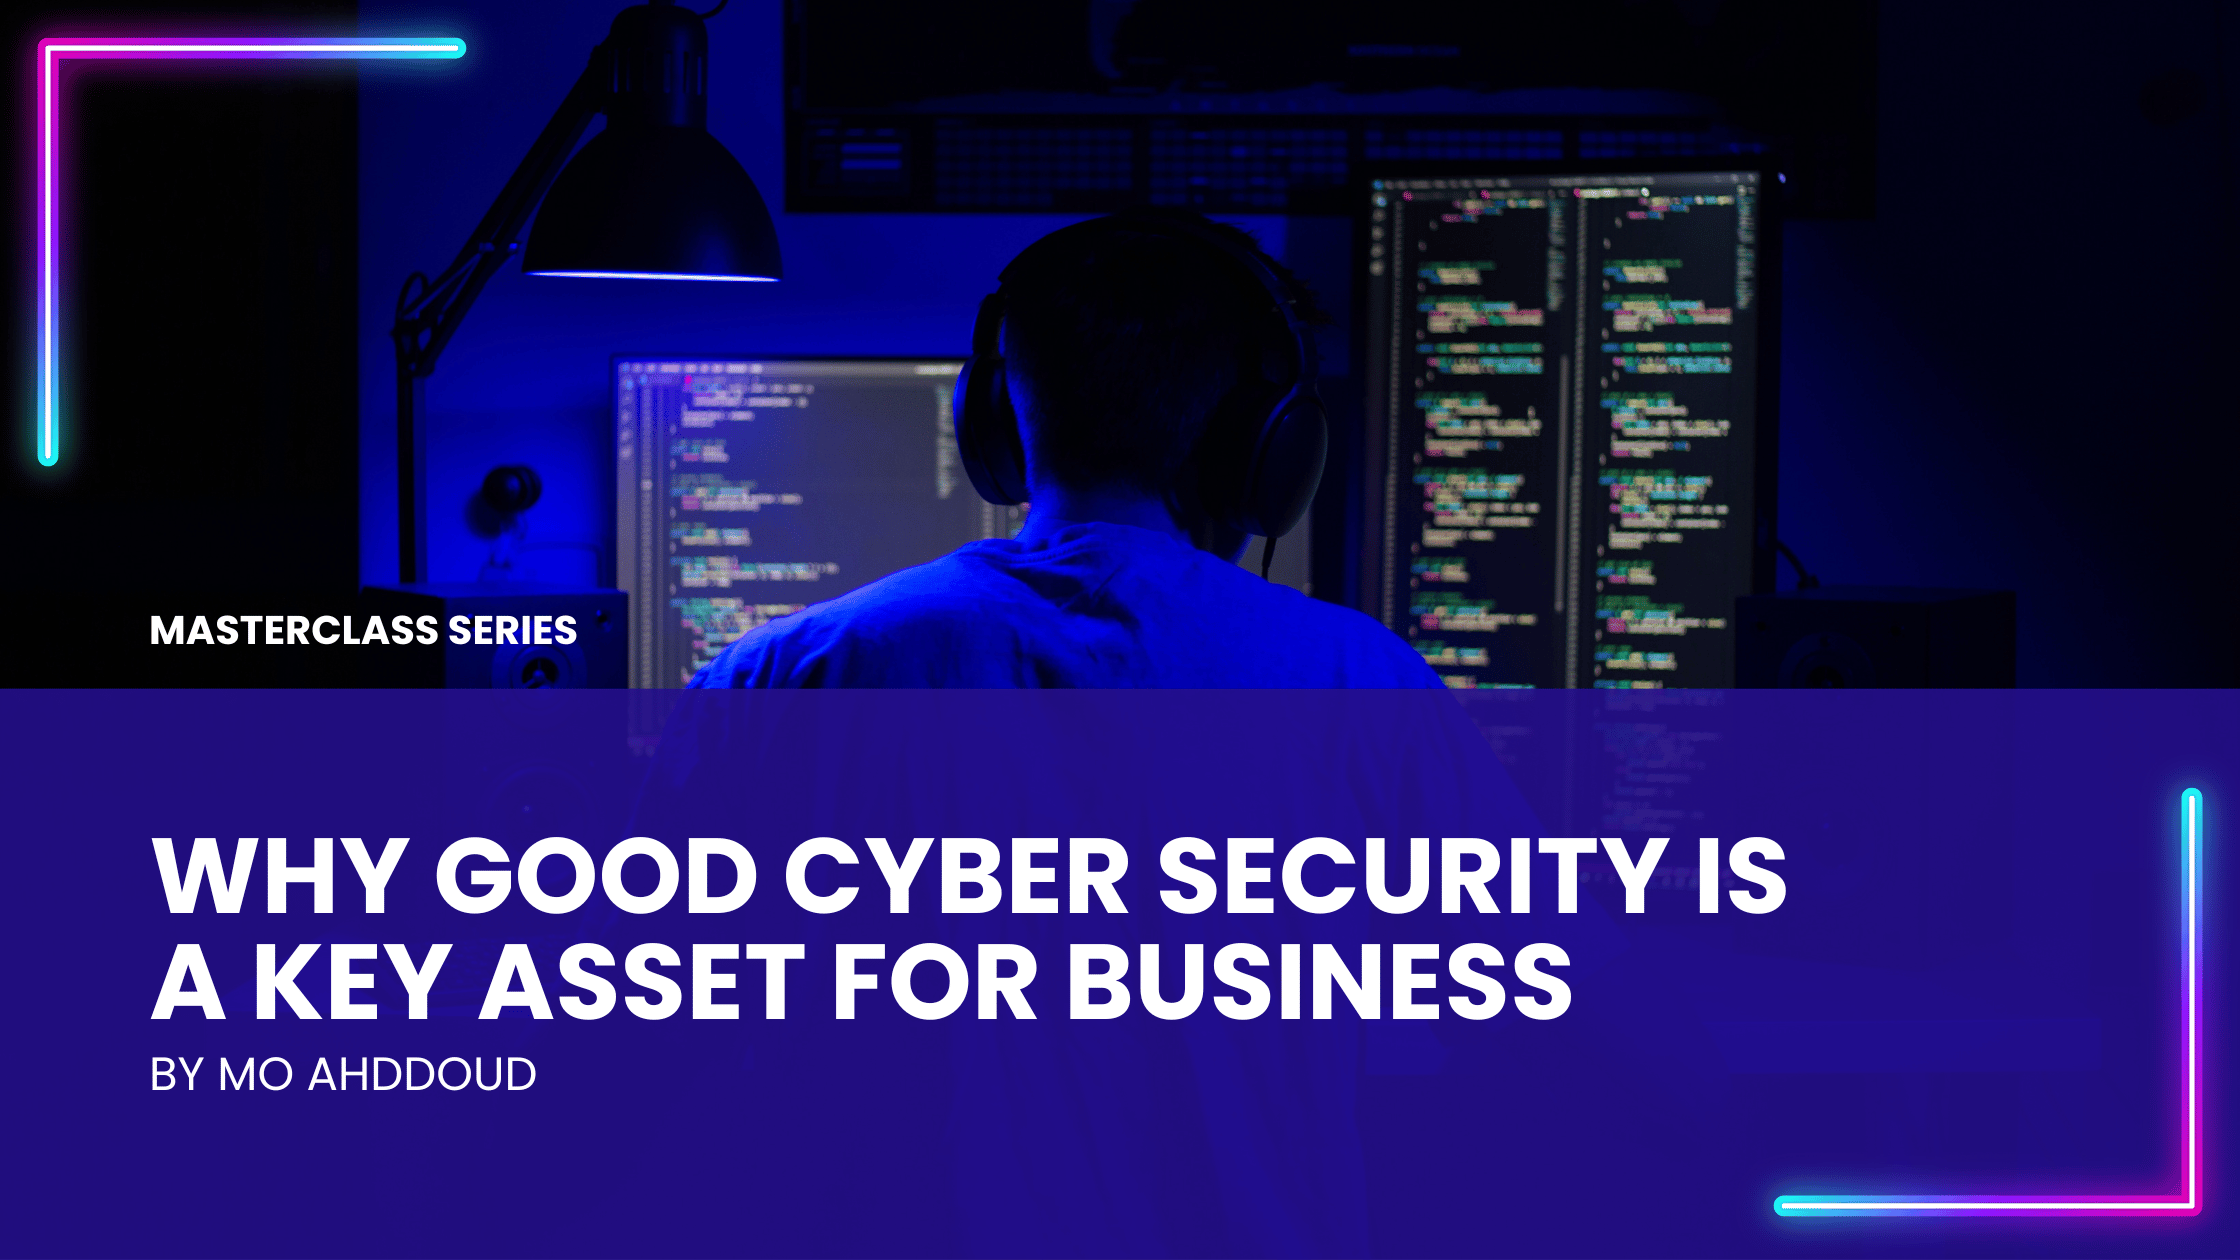 Why good cyber security is a key asset for business